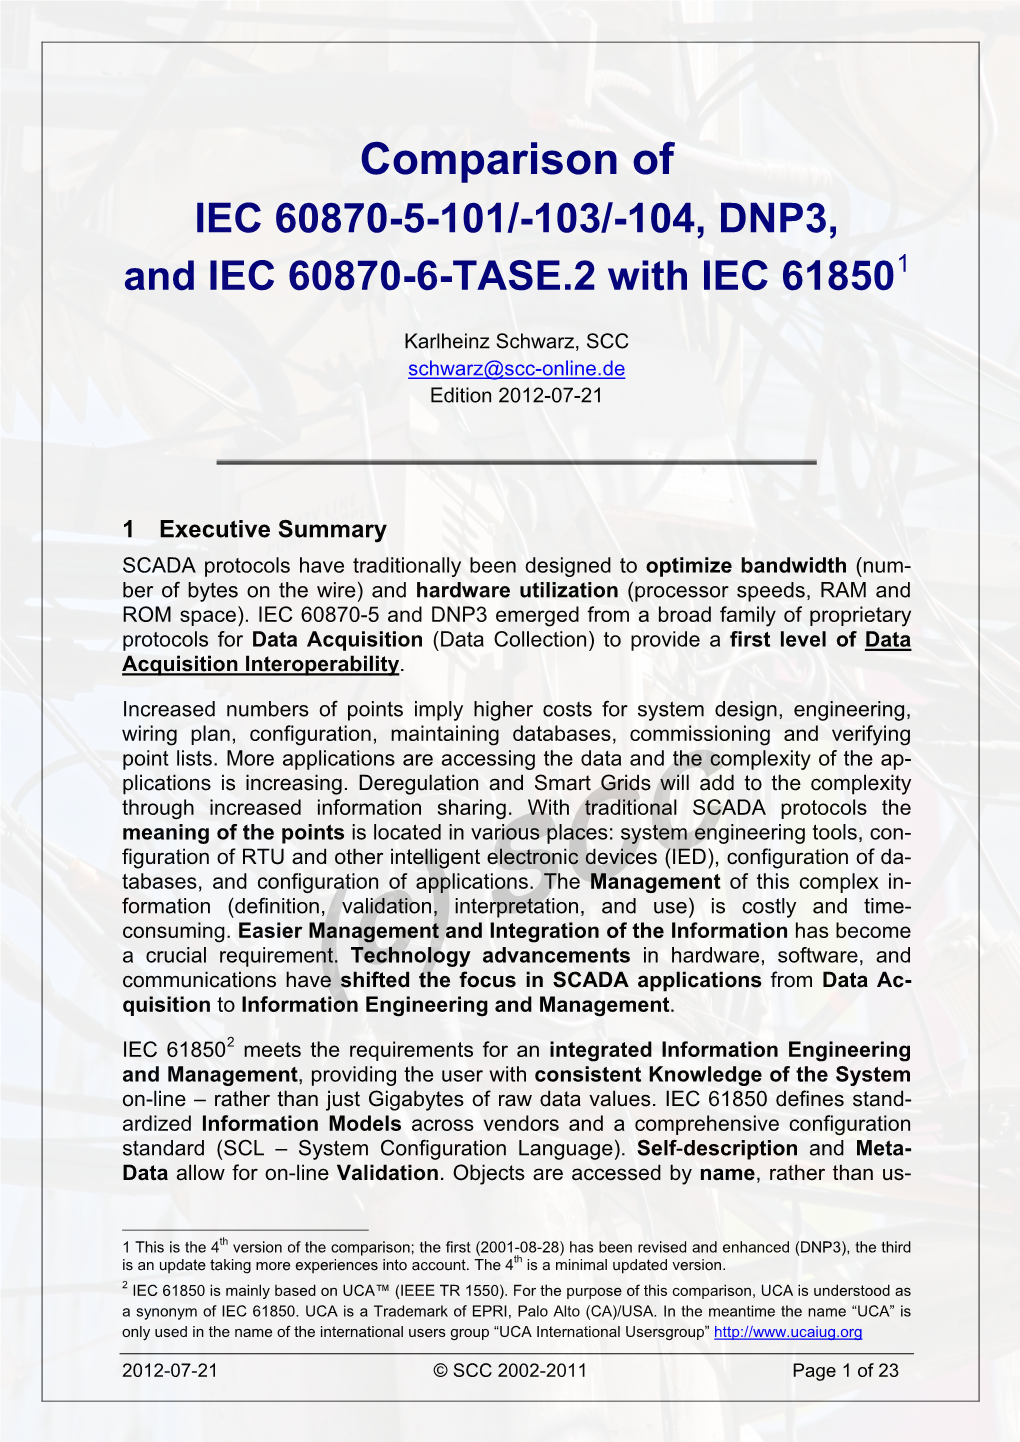 Comparison of IEC 60870-5-101/-103/-104, DNP3, and IEC 60870-6-TASE.2 with IEC 618501